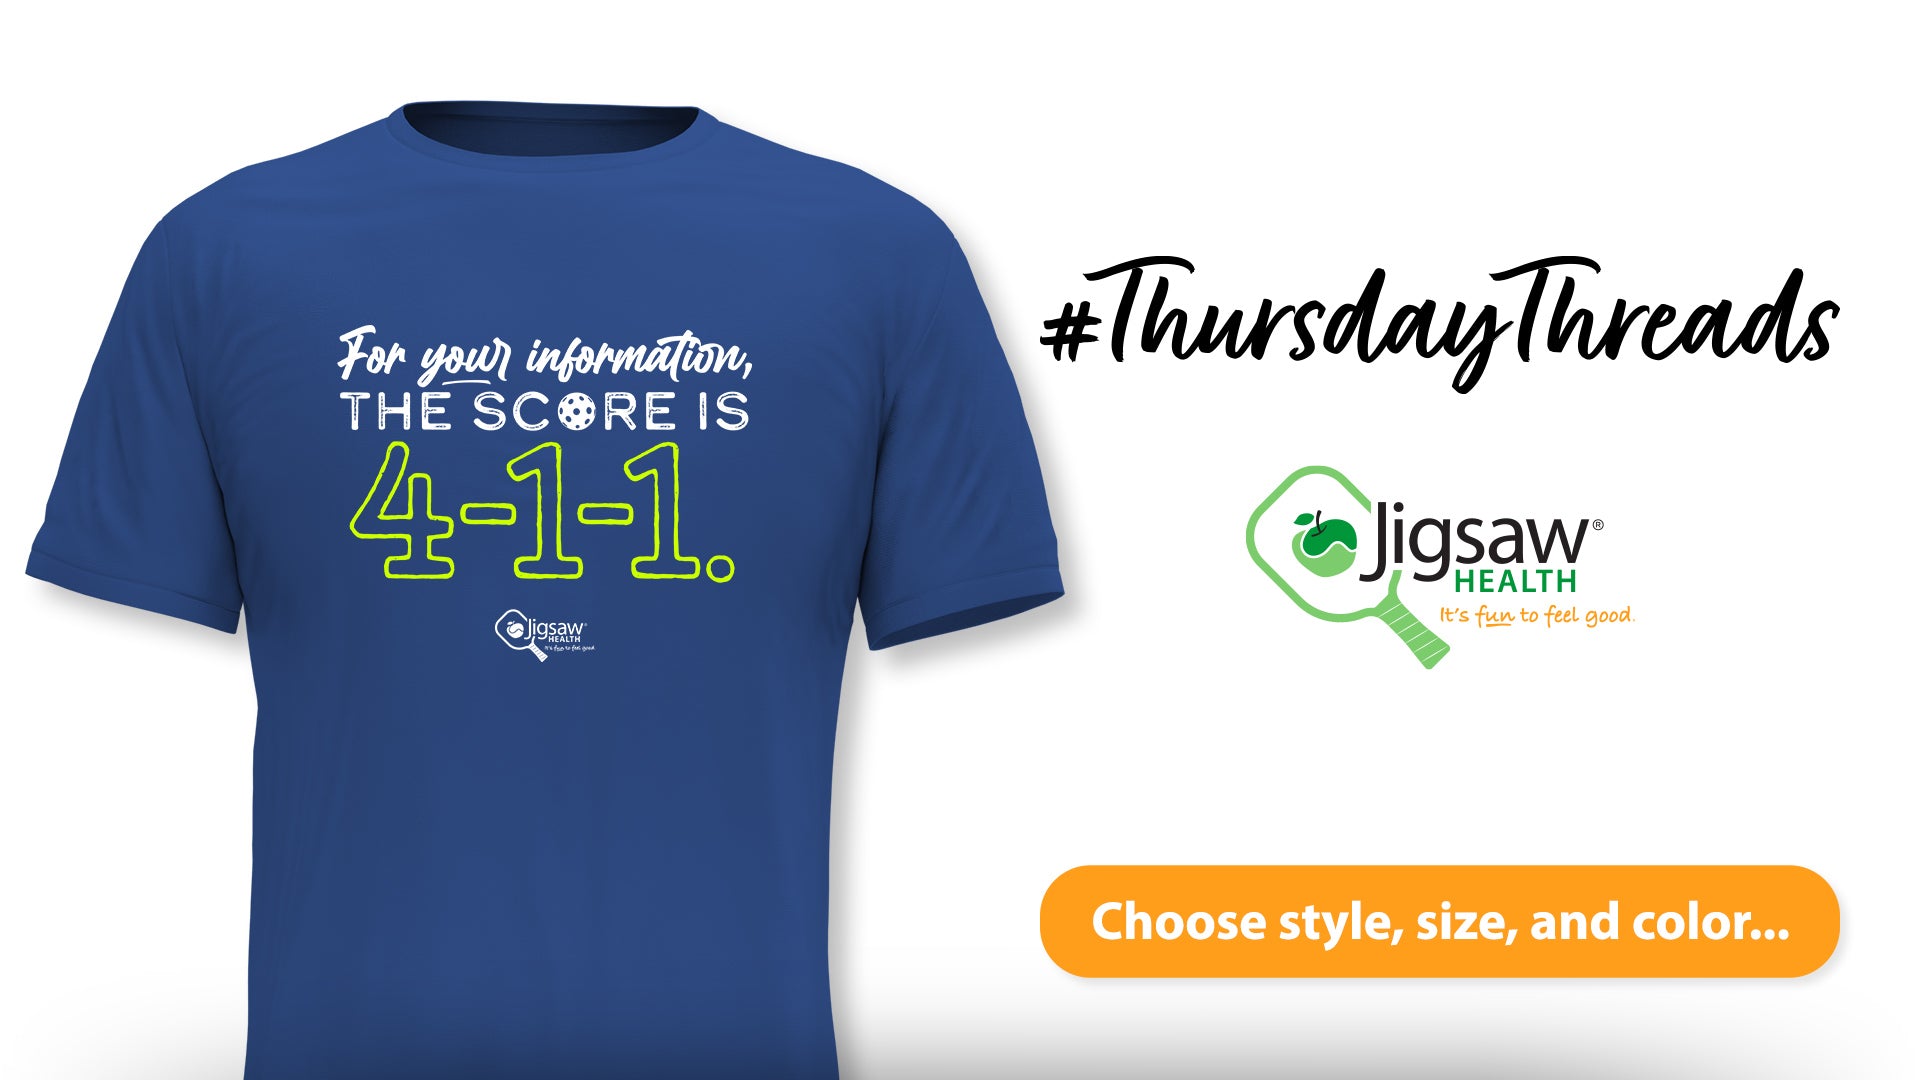 For your information, the score is 4-1-1. #ThursdayThreads